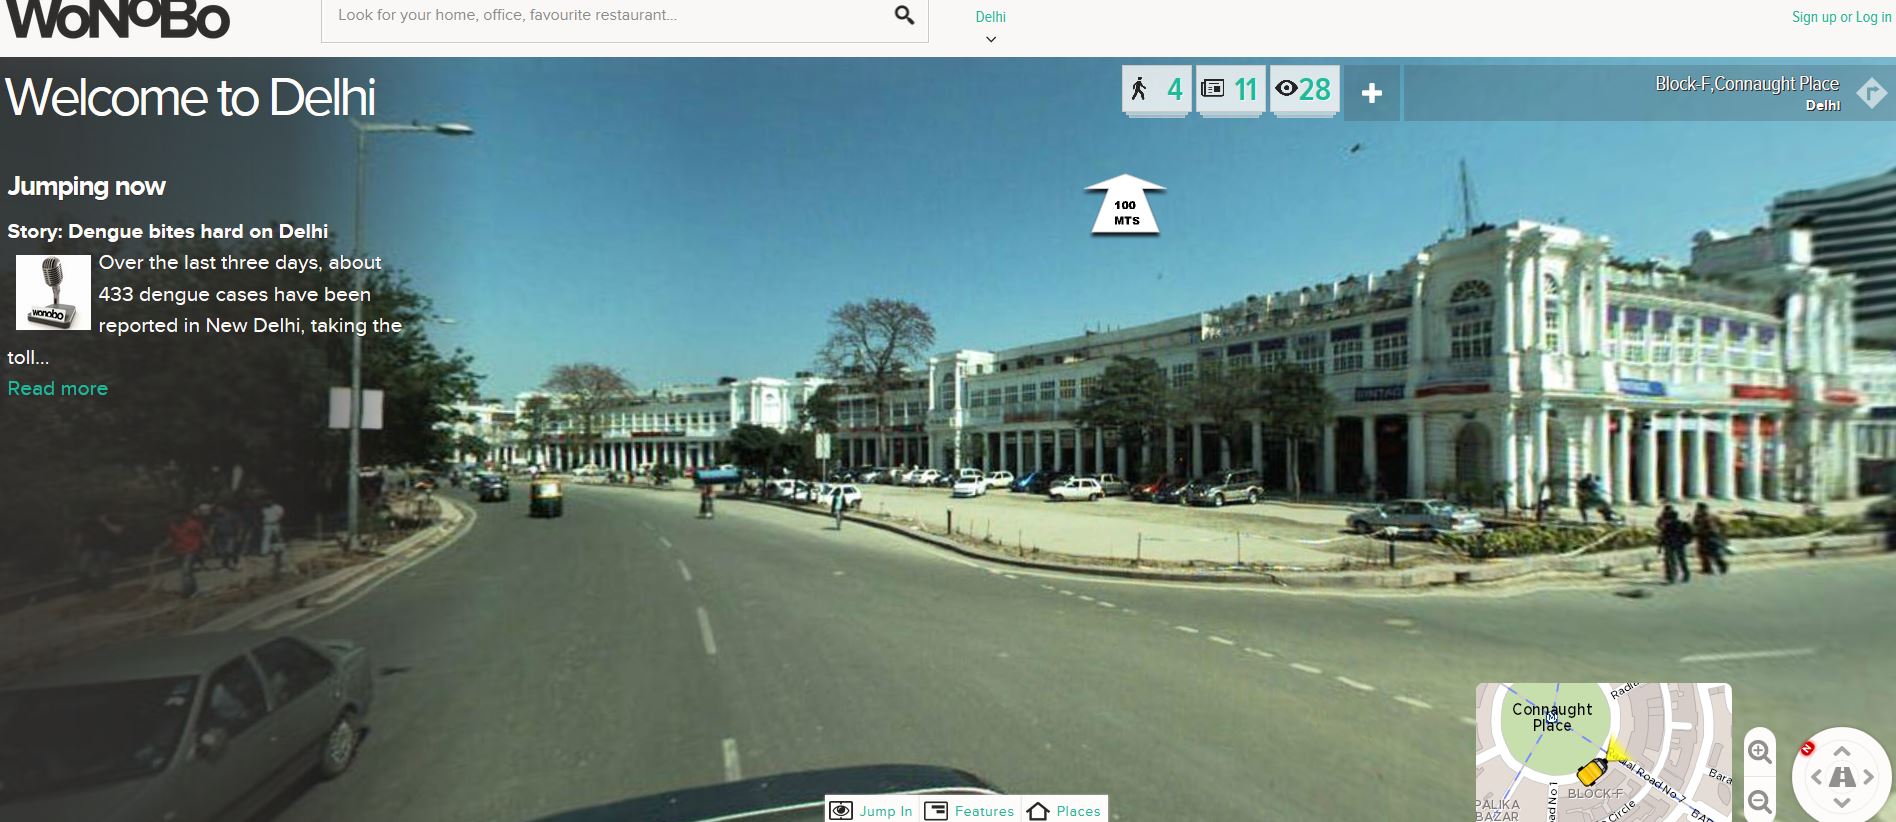 Street View Maps in India, a reality with Wonobo Maps- Not ...